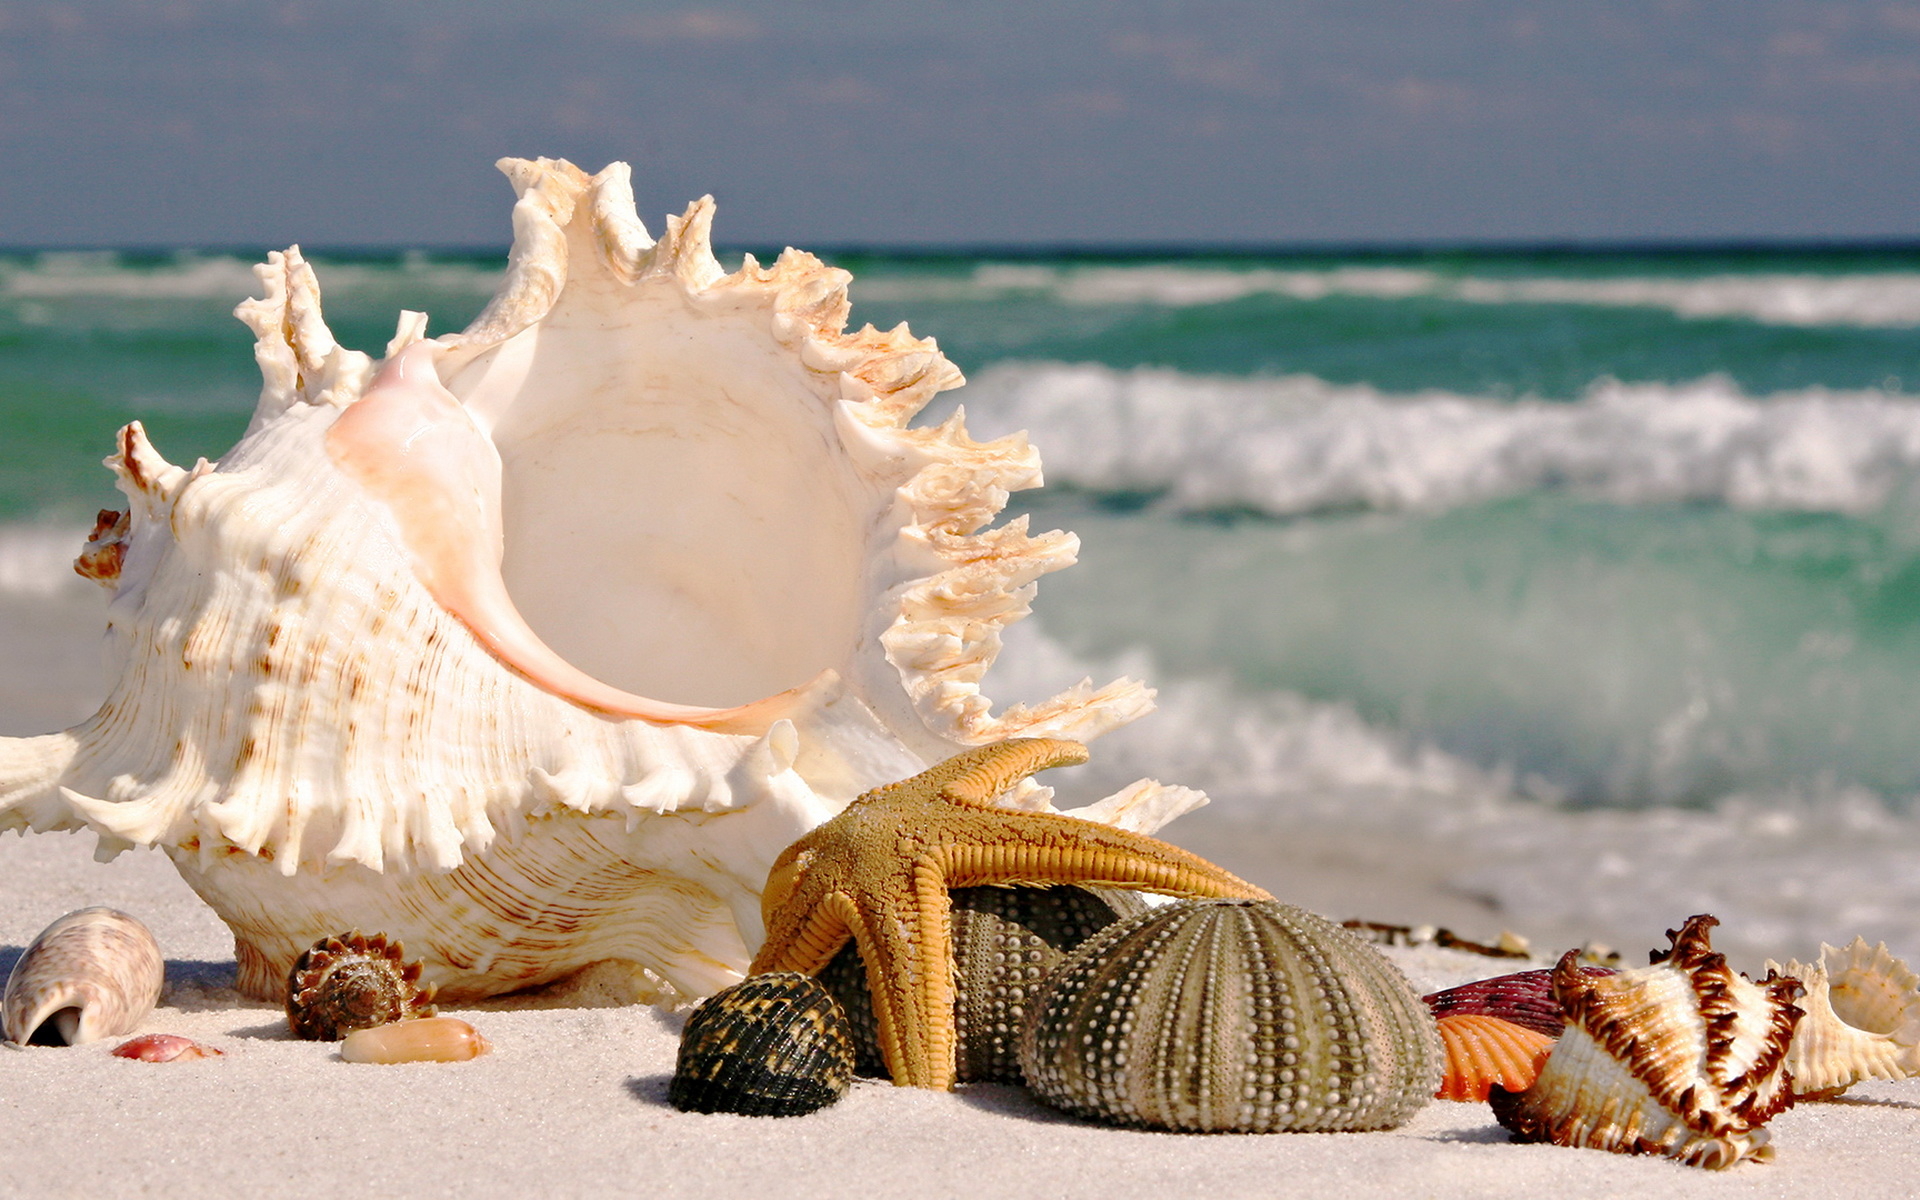 Seashell Photos Download The BEST Free Seashell Stock Photos  HD Images